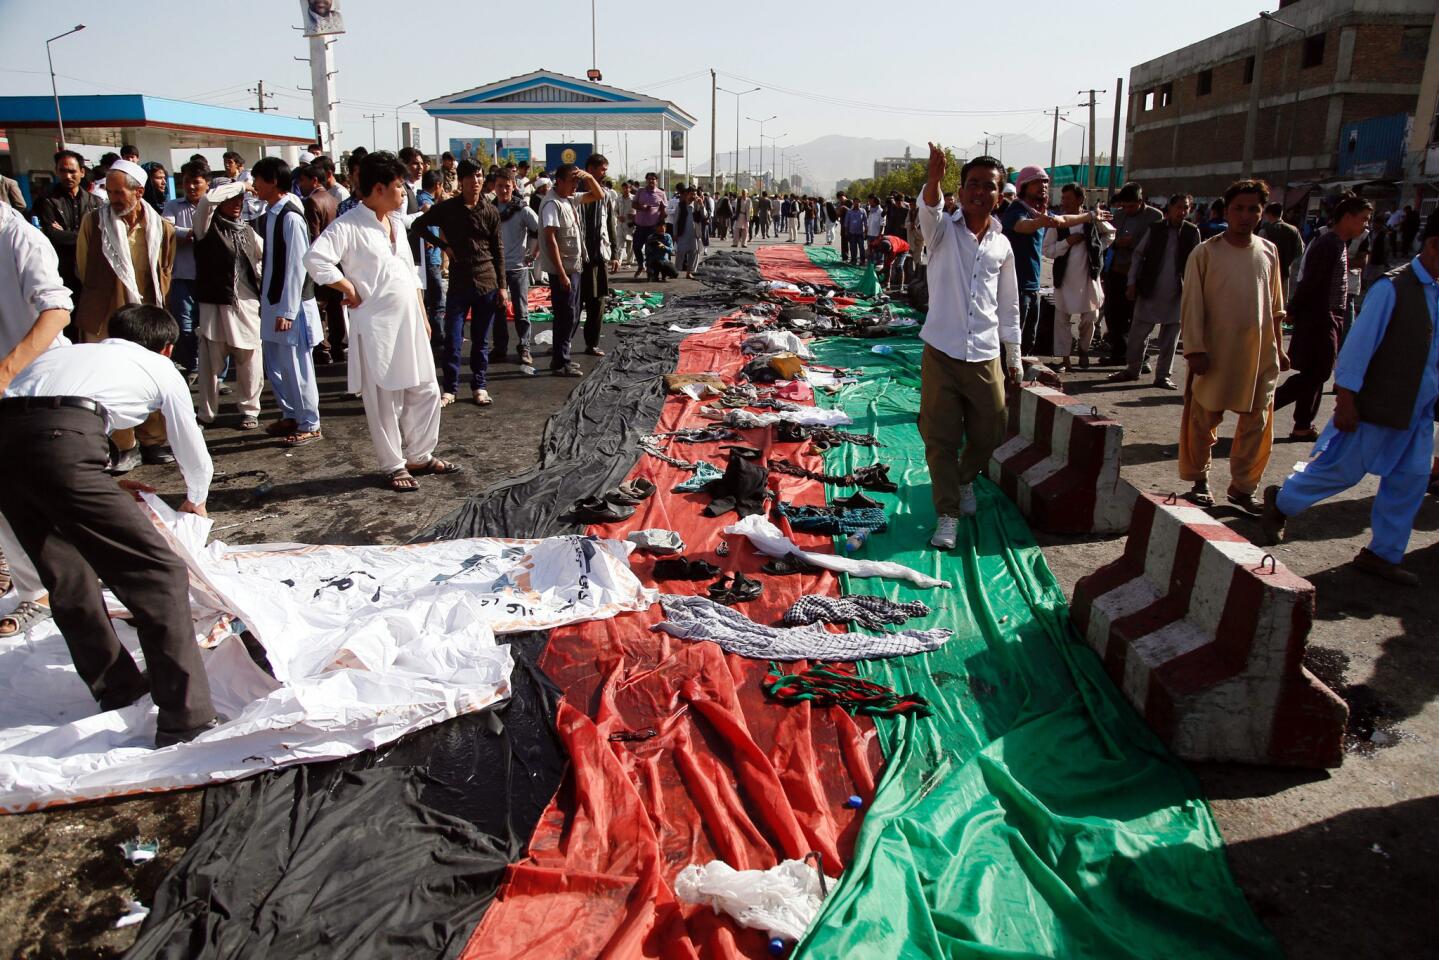 People collect the belongings of the victims at the scene of suicide bomb attack that targeted a demonstration of Hazara minority in Kabul, Afghanistan on July 23, 2016. People from Hazara minority were protesting the proposed route of the Turkmenistan, Uzbekistan, Tajikistan, Afghanistan, and Pakistan (TUTAP) power line, calling on the government to re-route the line through Bamiyan province which has a majority of Hazara population.